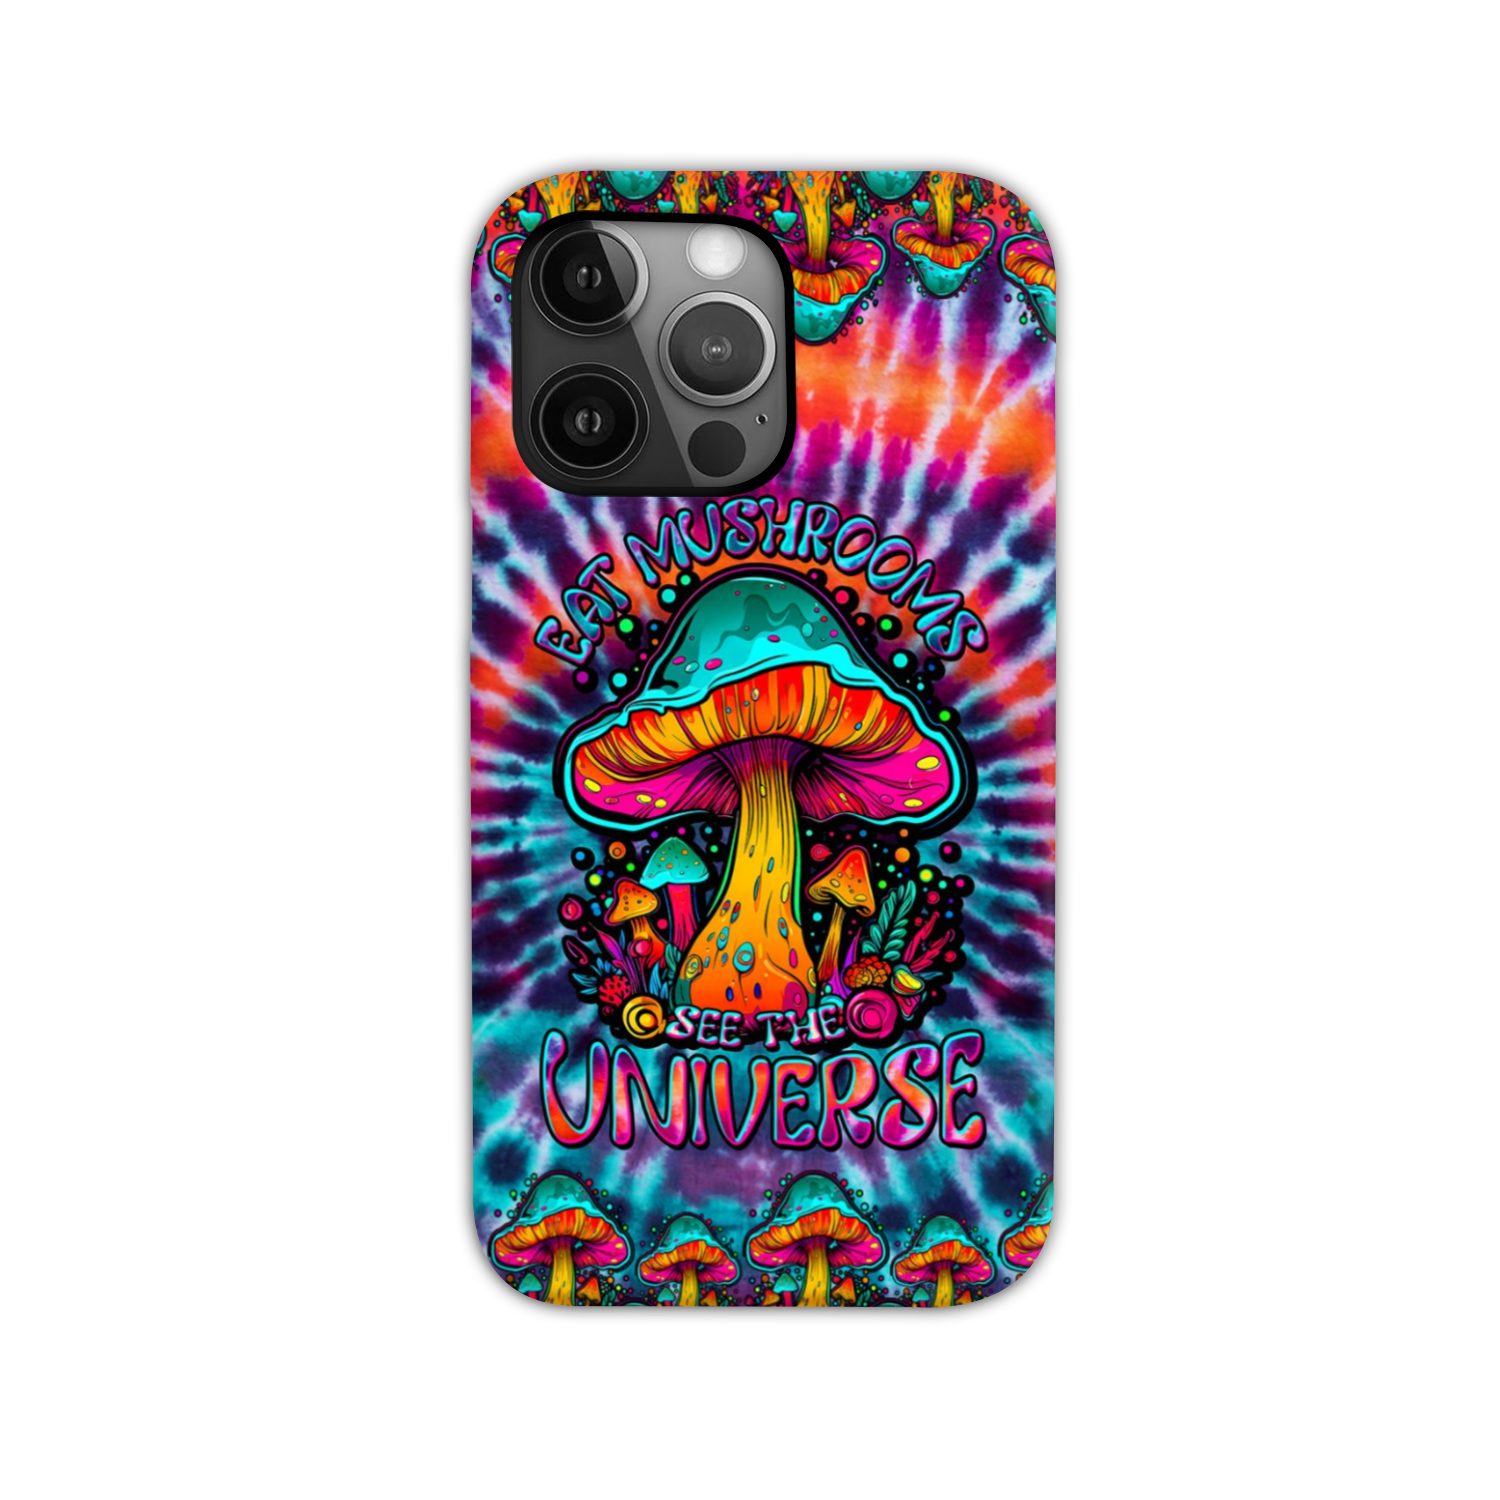 EAT MUSHROOMS SEE THE UNIVERSE TIE DYE PHONE CASE - TLTW2707233